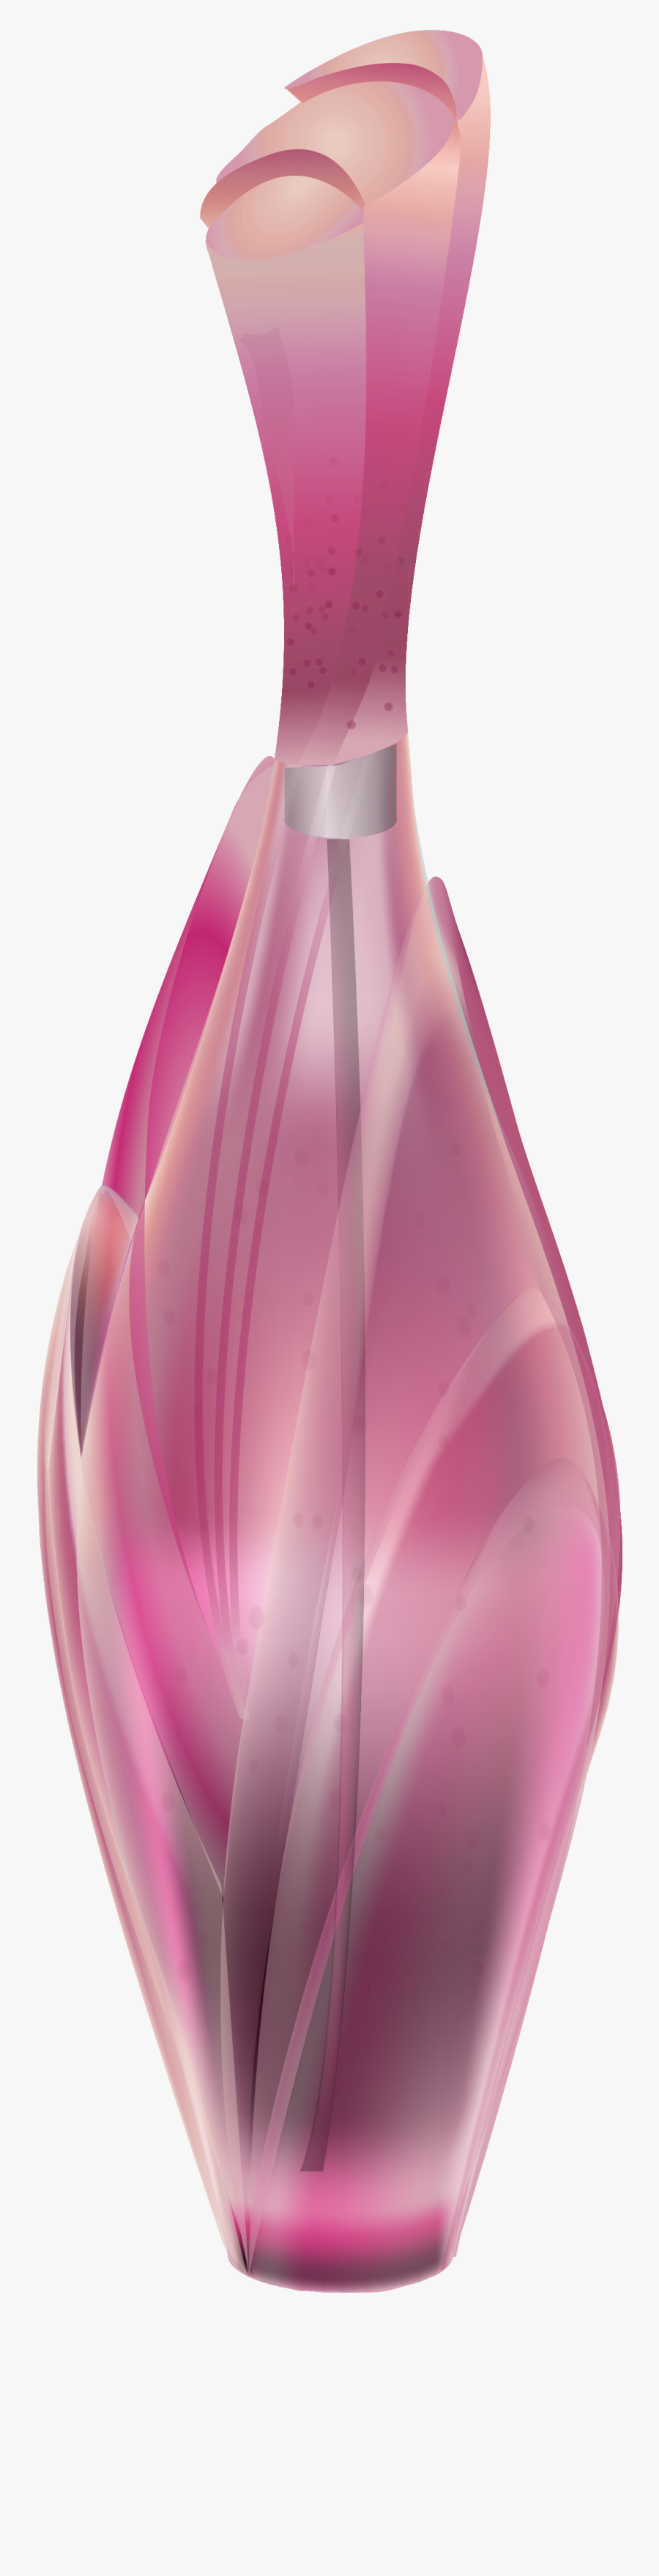 Perfume Bottle Png Clipart Picture - Pink Png Perfume Bottle, Transparent Clipart